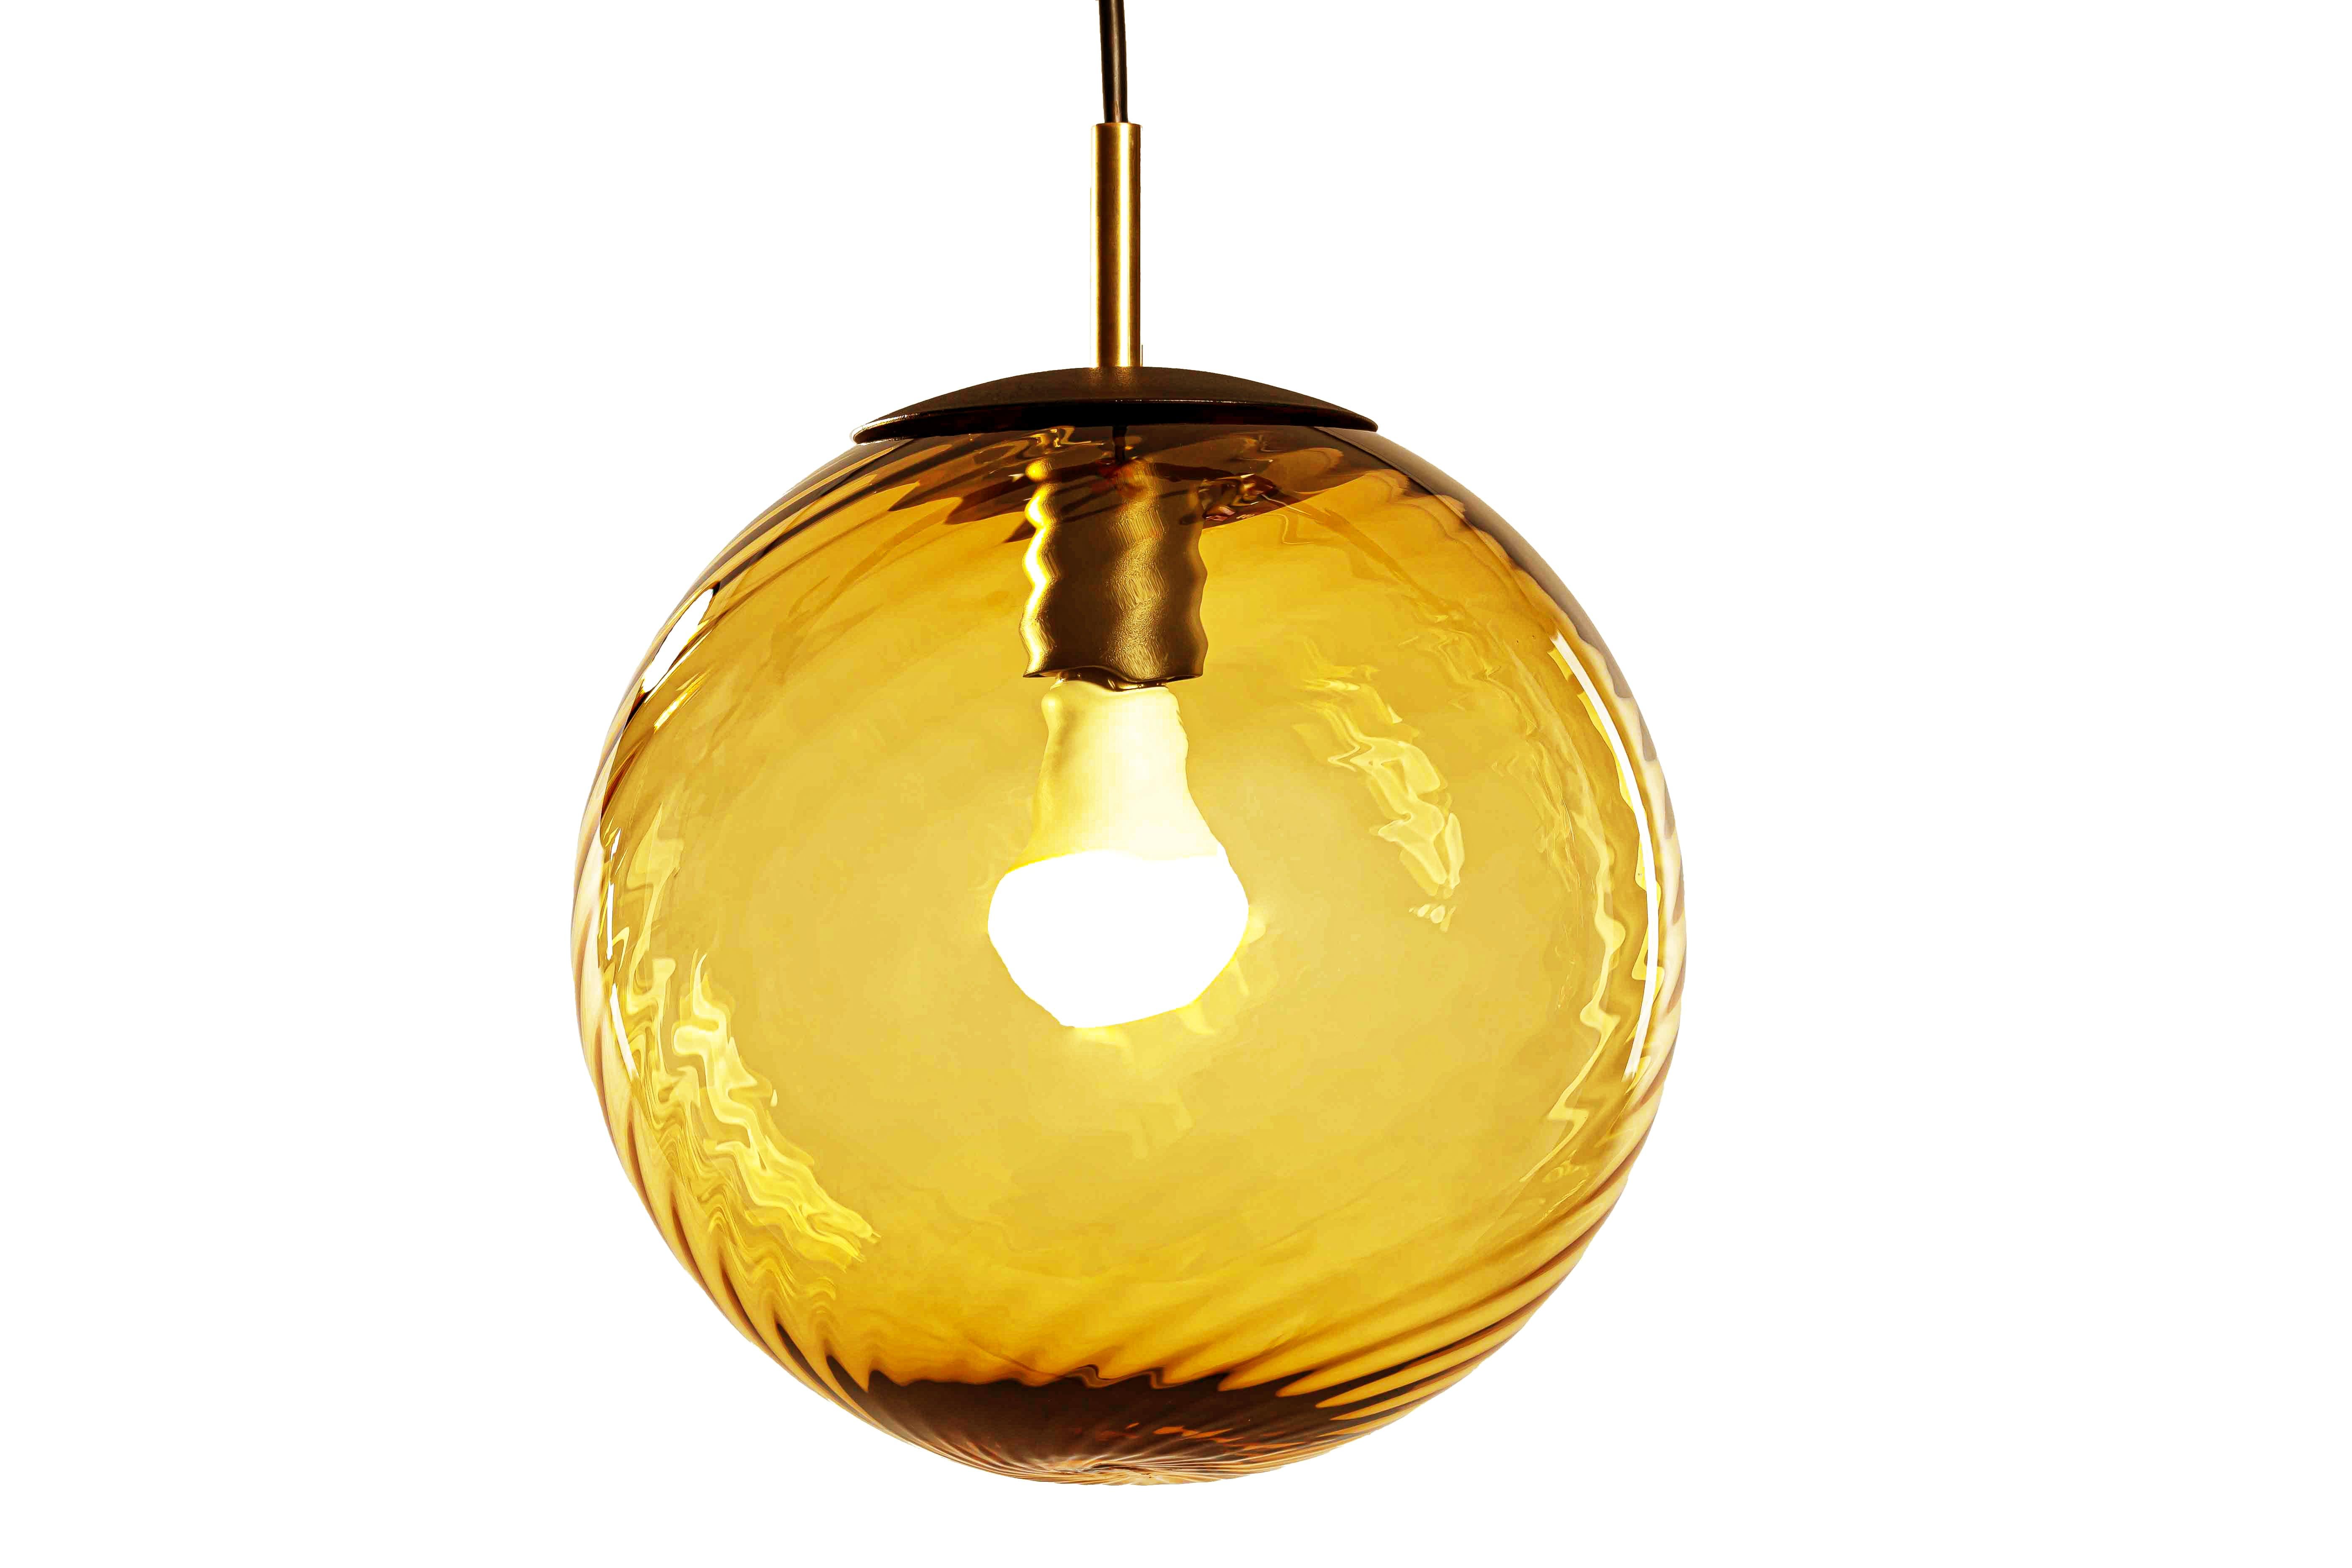 The new Astro range from Luminosa, a range of architectural glass lamps in transparent amber with optical twist. Classical yet modern these little pearls suit just about every environment. Cord-set and matching canopy are powder-coated black with